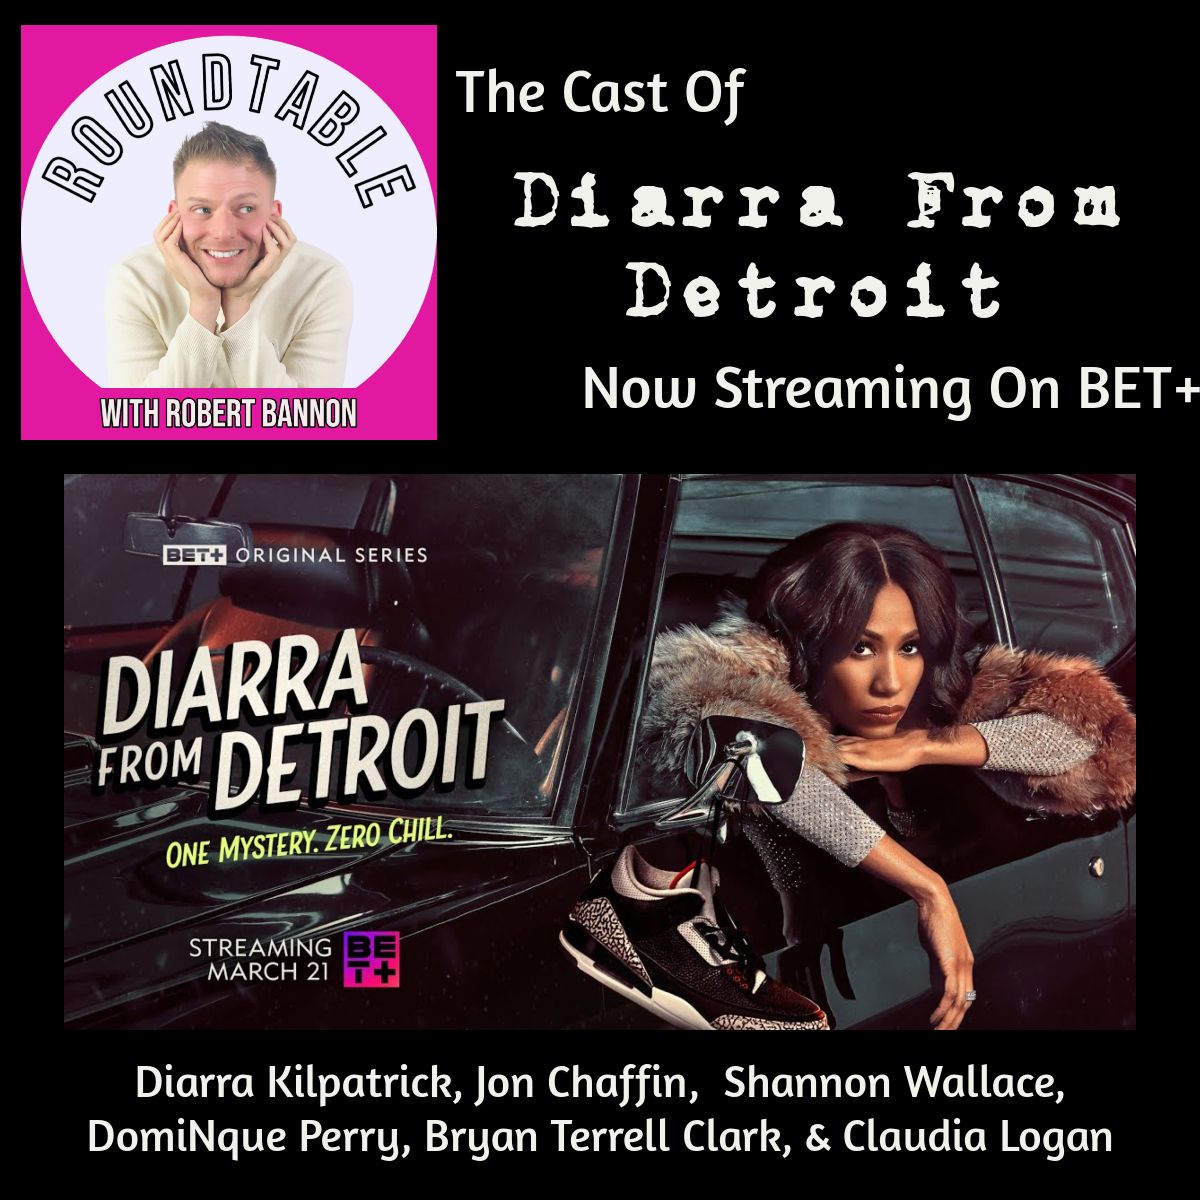 Broadway Podcast Network - Ep 167- The Cast of "Diarra From Detroit" Stops By! The New Show Is Now Streaming on BET+!